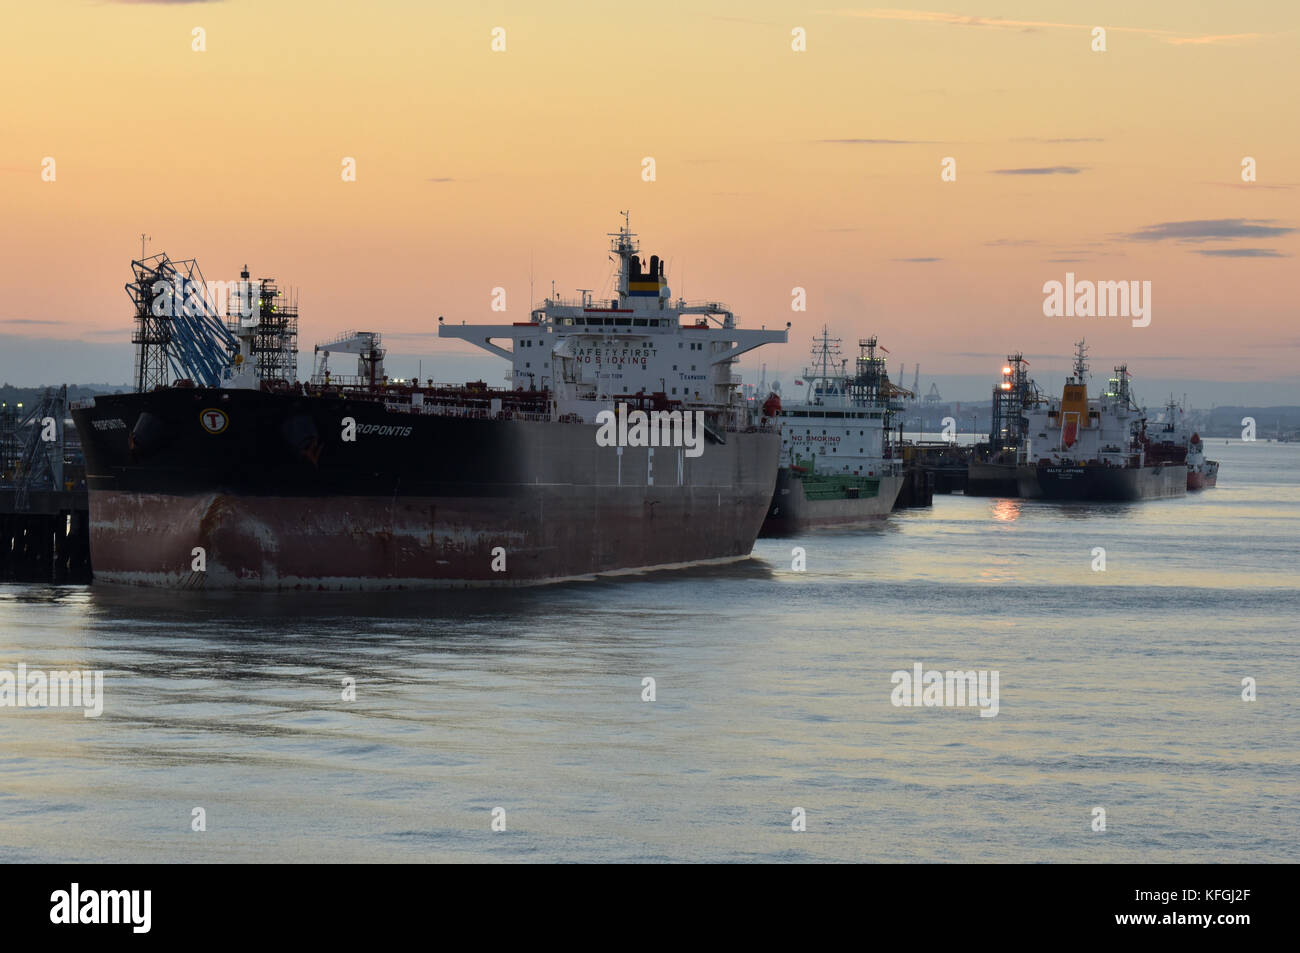 Very large oil tankers and gas ships alongside at the marine terminal at fawley refinery on the edge of southampton water offloading crude oil. Stock Photo